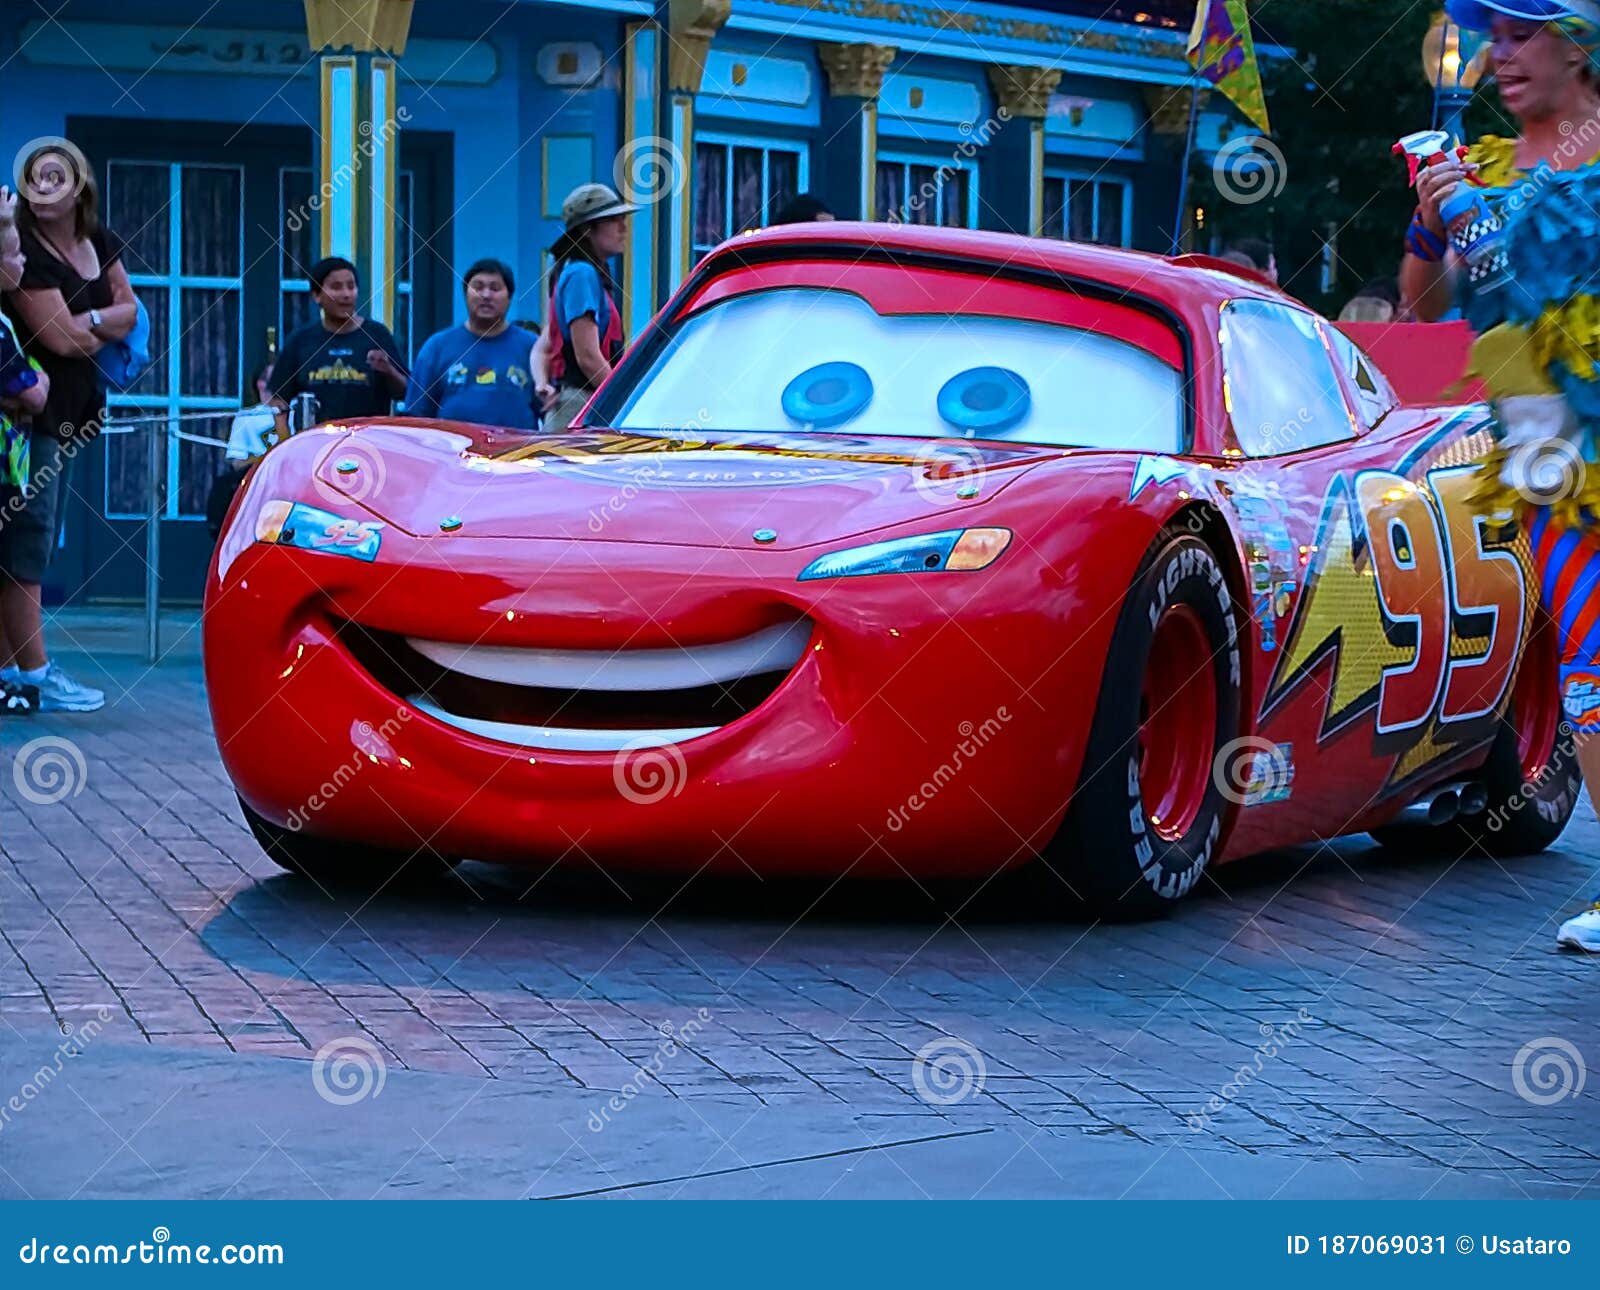 138 Lightning Mcqueen Photos Free Royalty Free Stock Photos From Dreamstime